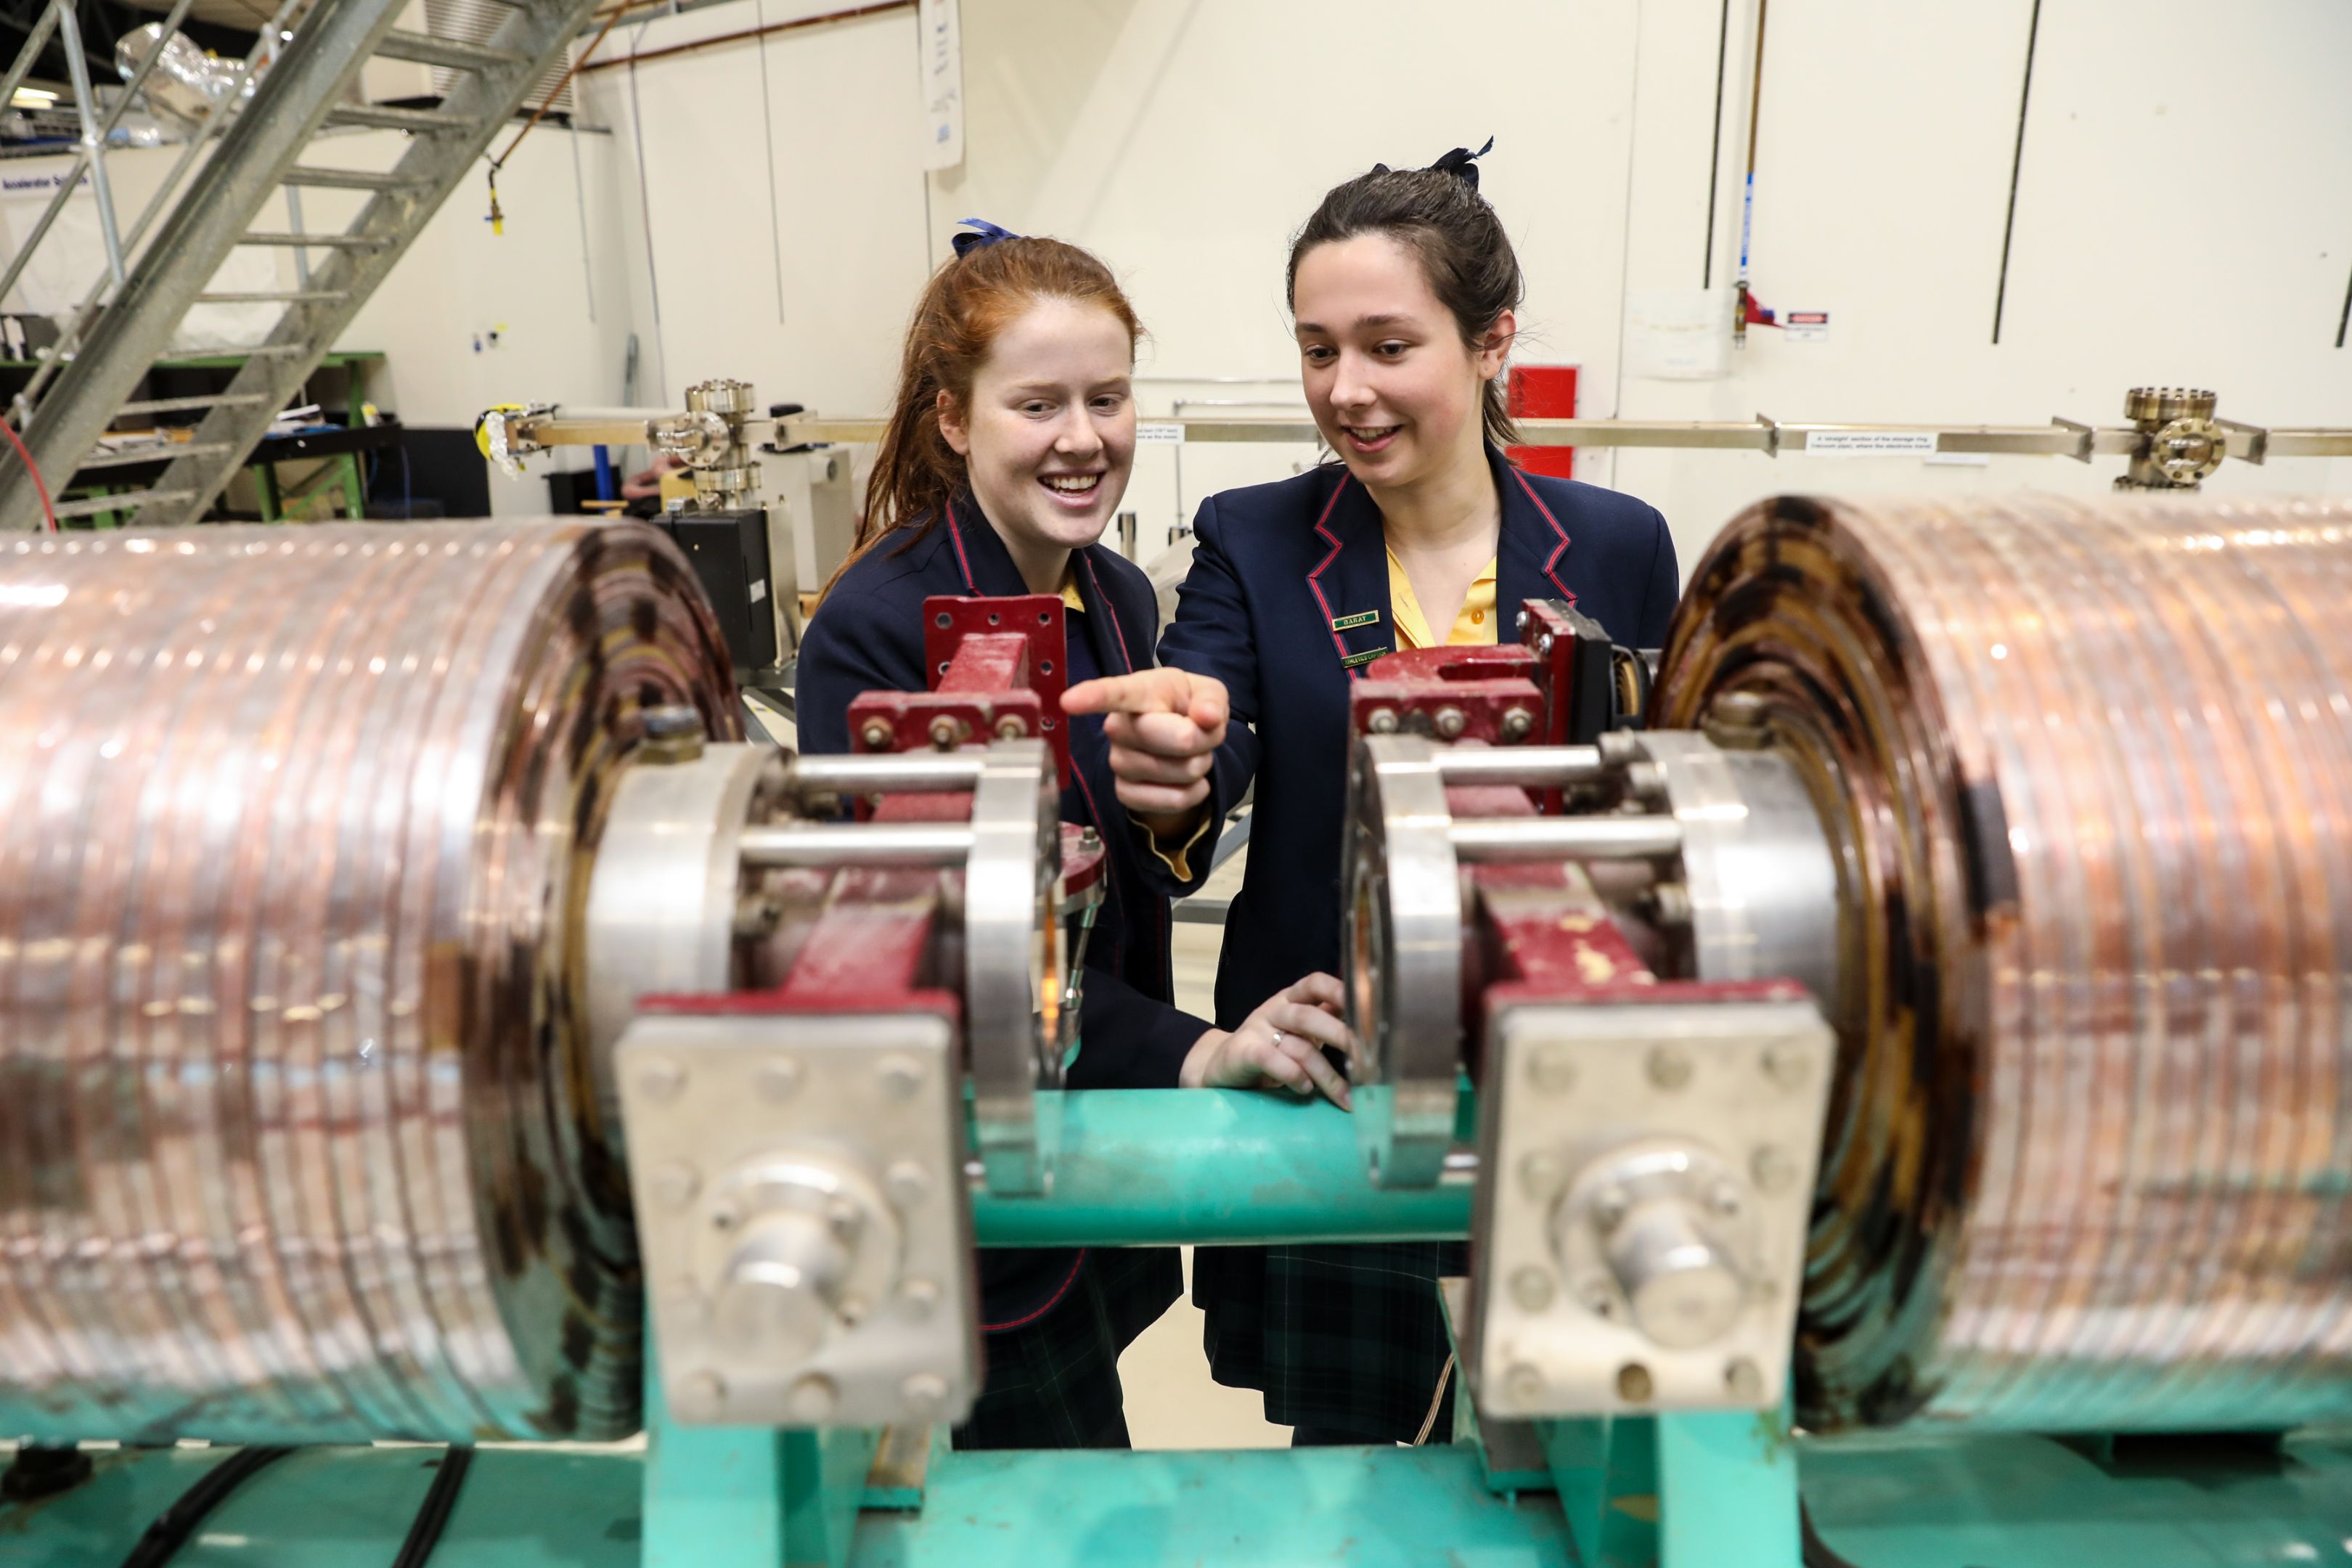 Two smiling female high school students inspecting a synchrotron machine